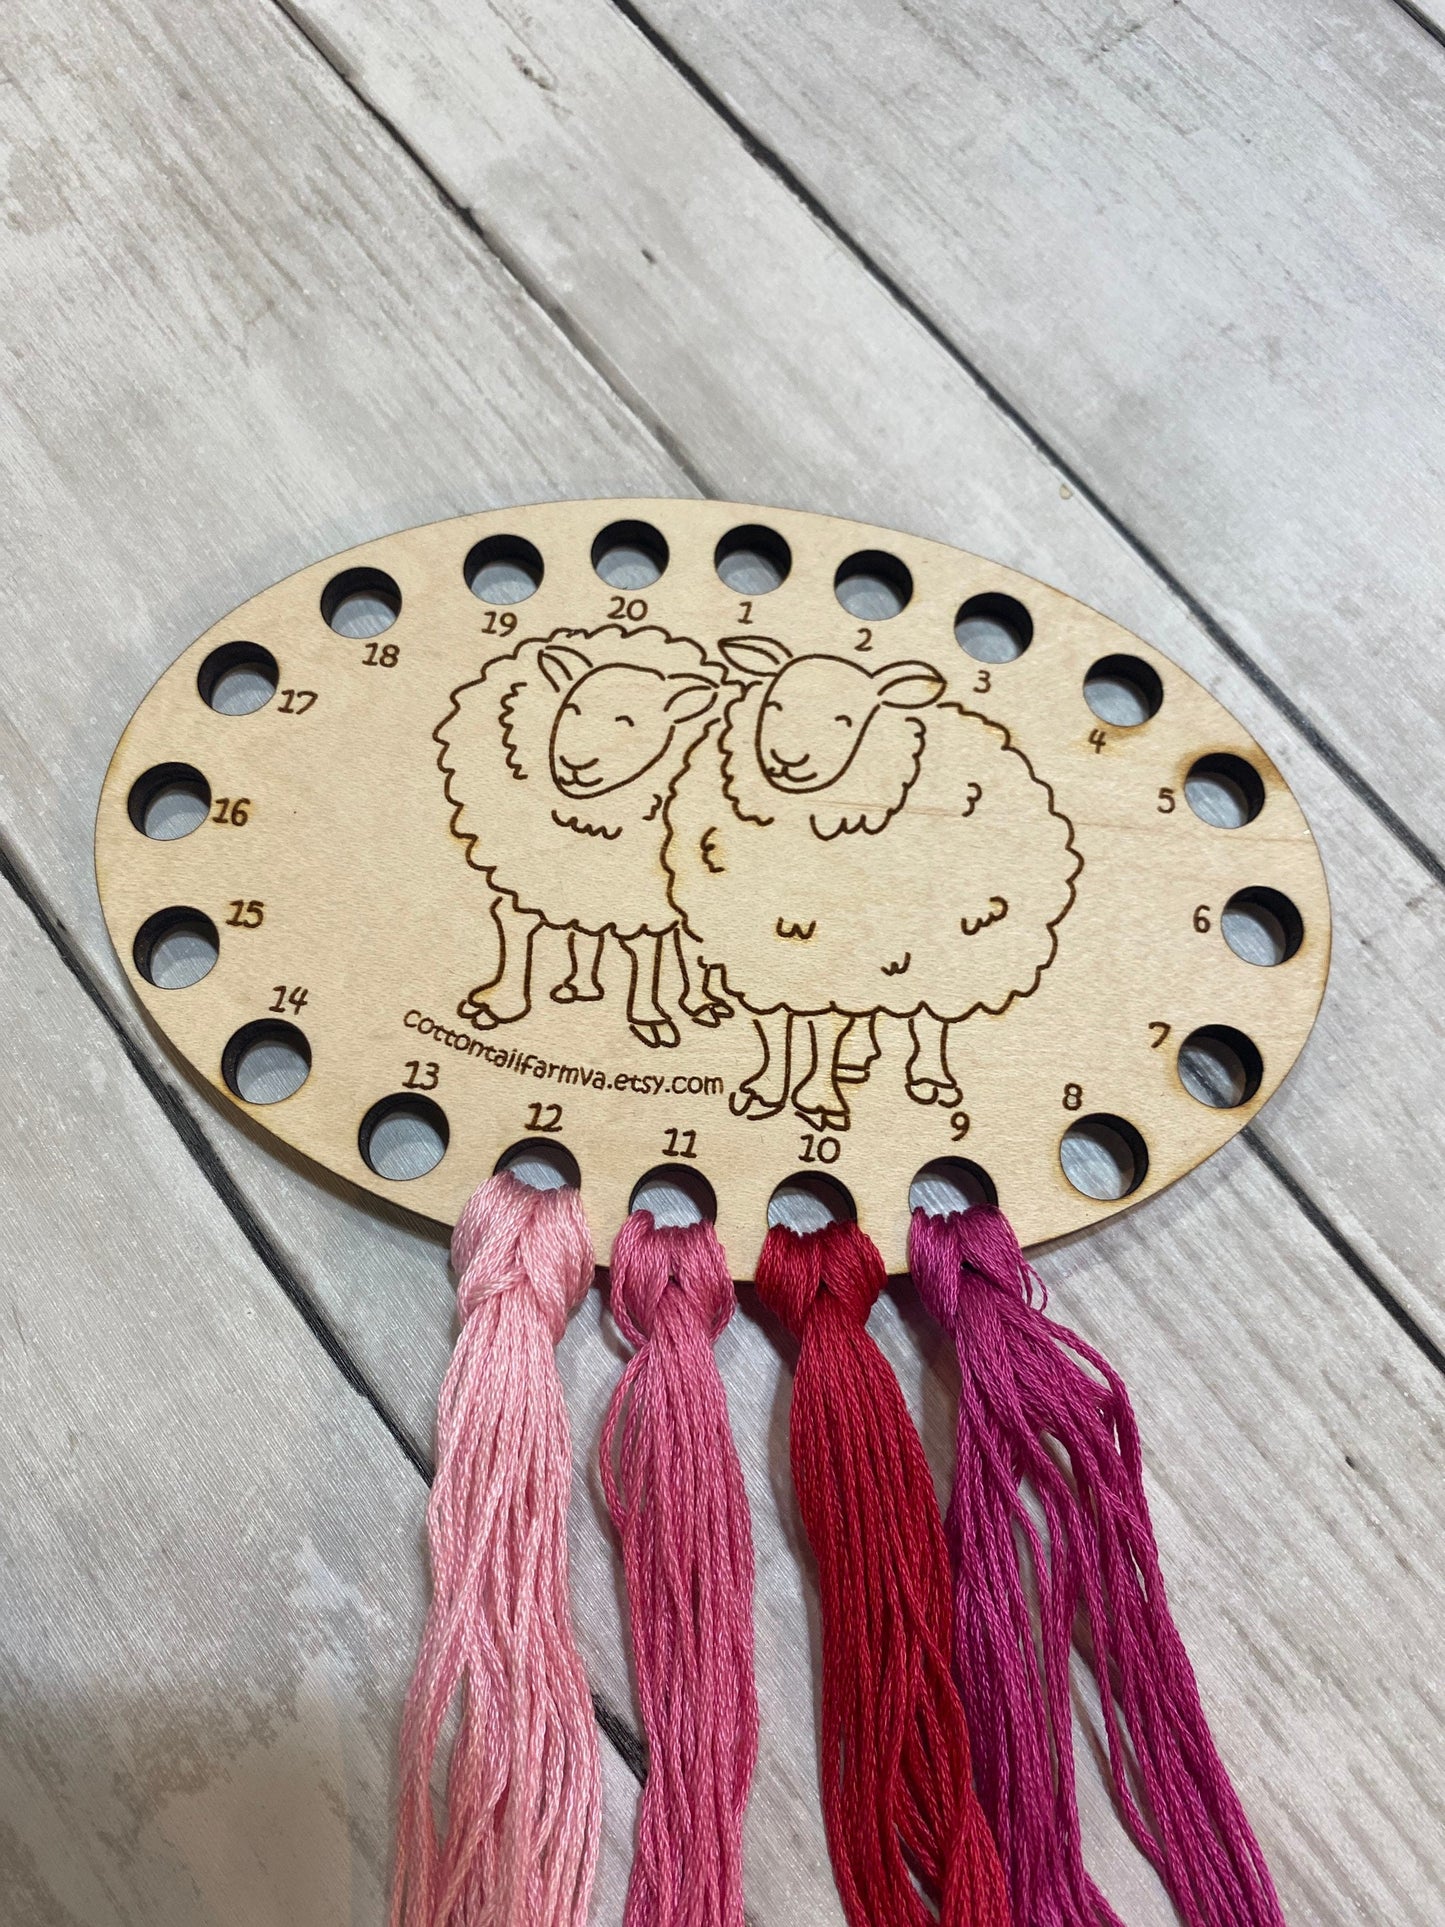 Embroidery Floss Organizer